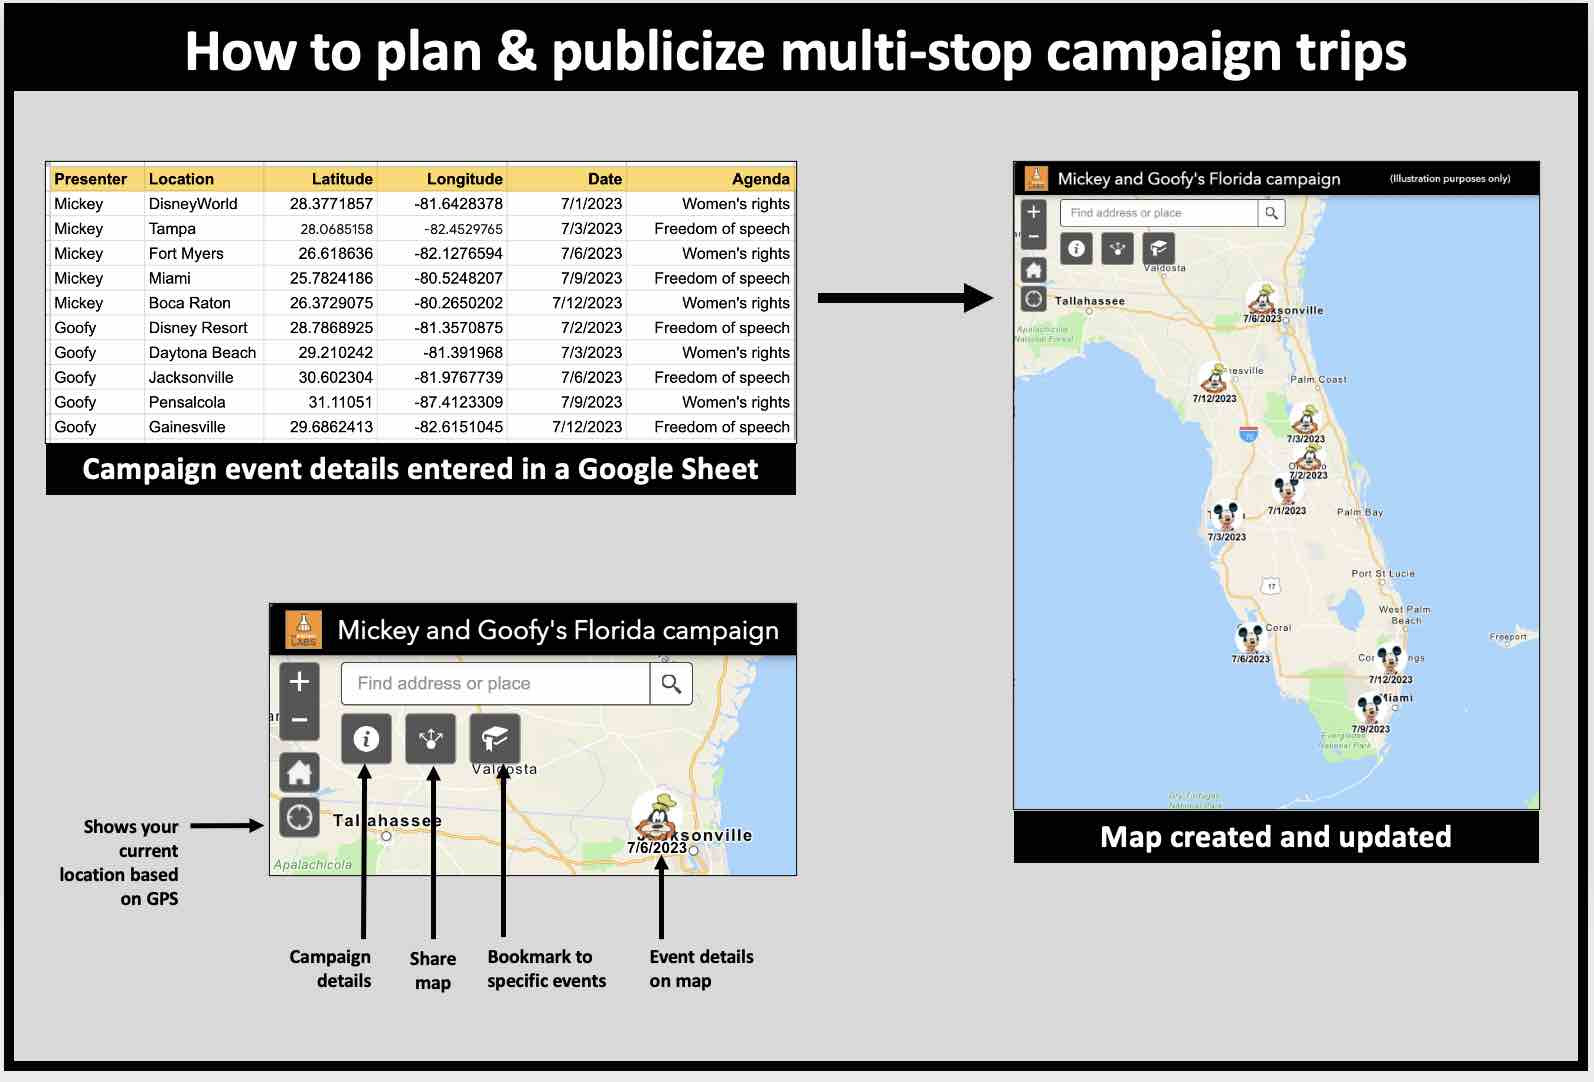 How to plan and publicize campaign trips with multiple stops and presenters